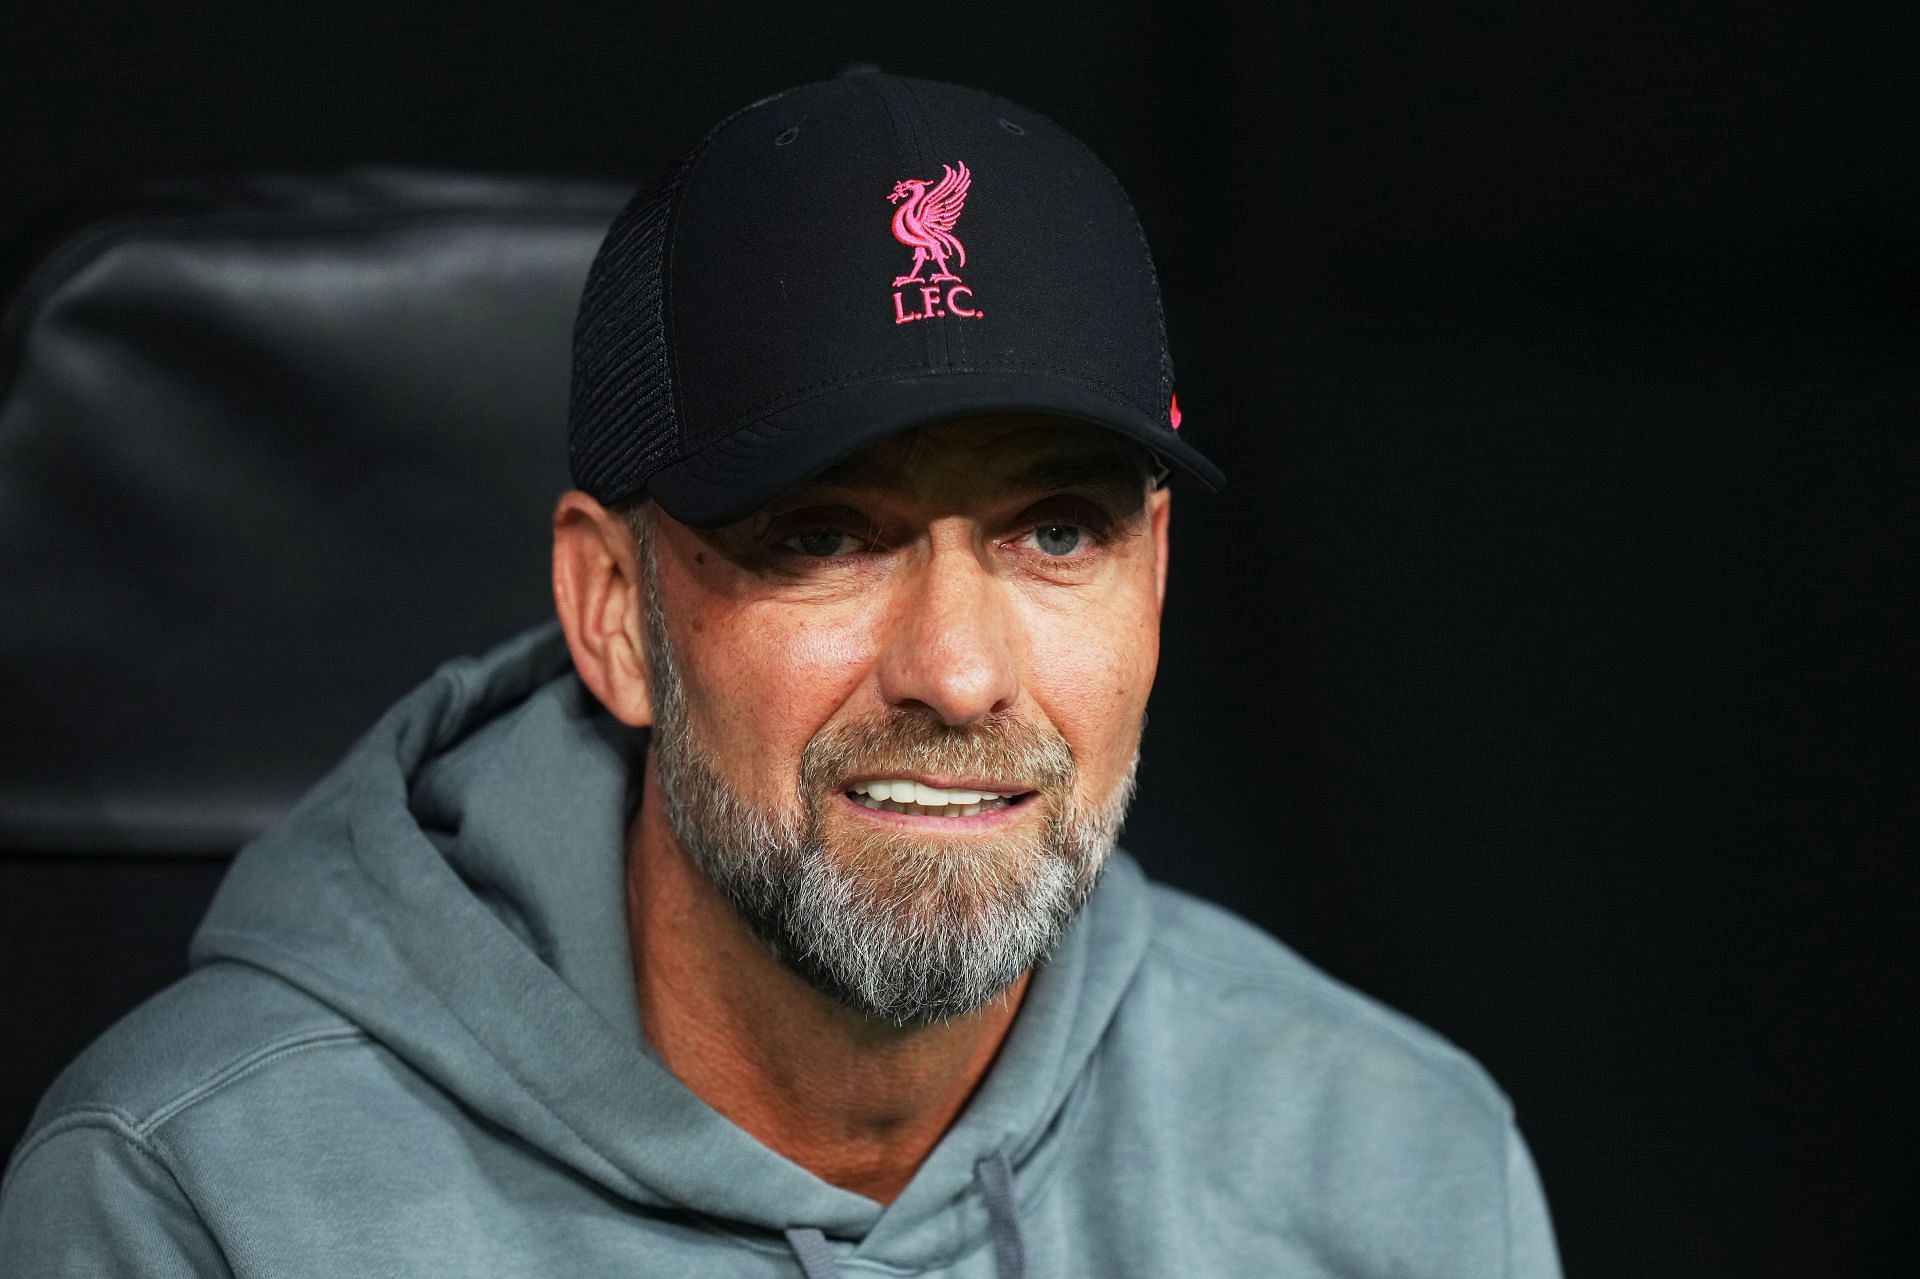 Liverpool manager Jurgen Klopp gives advice to Chelsea admits he is happy to see them struggle